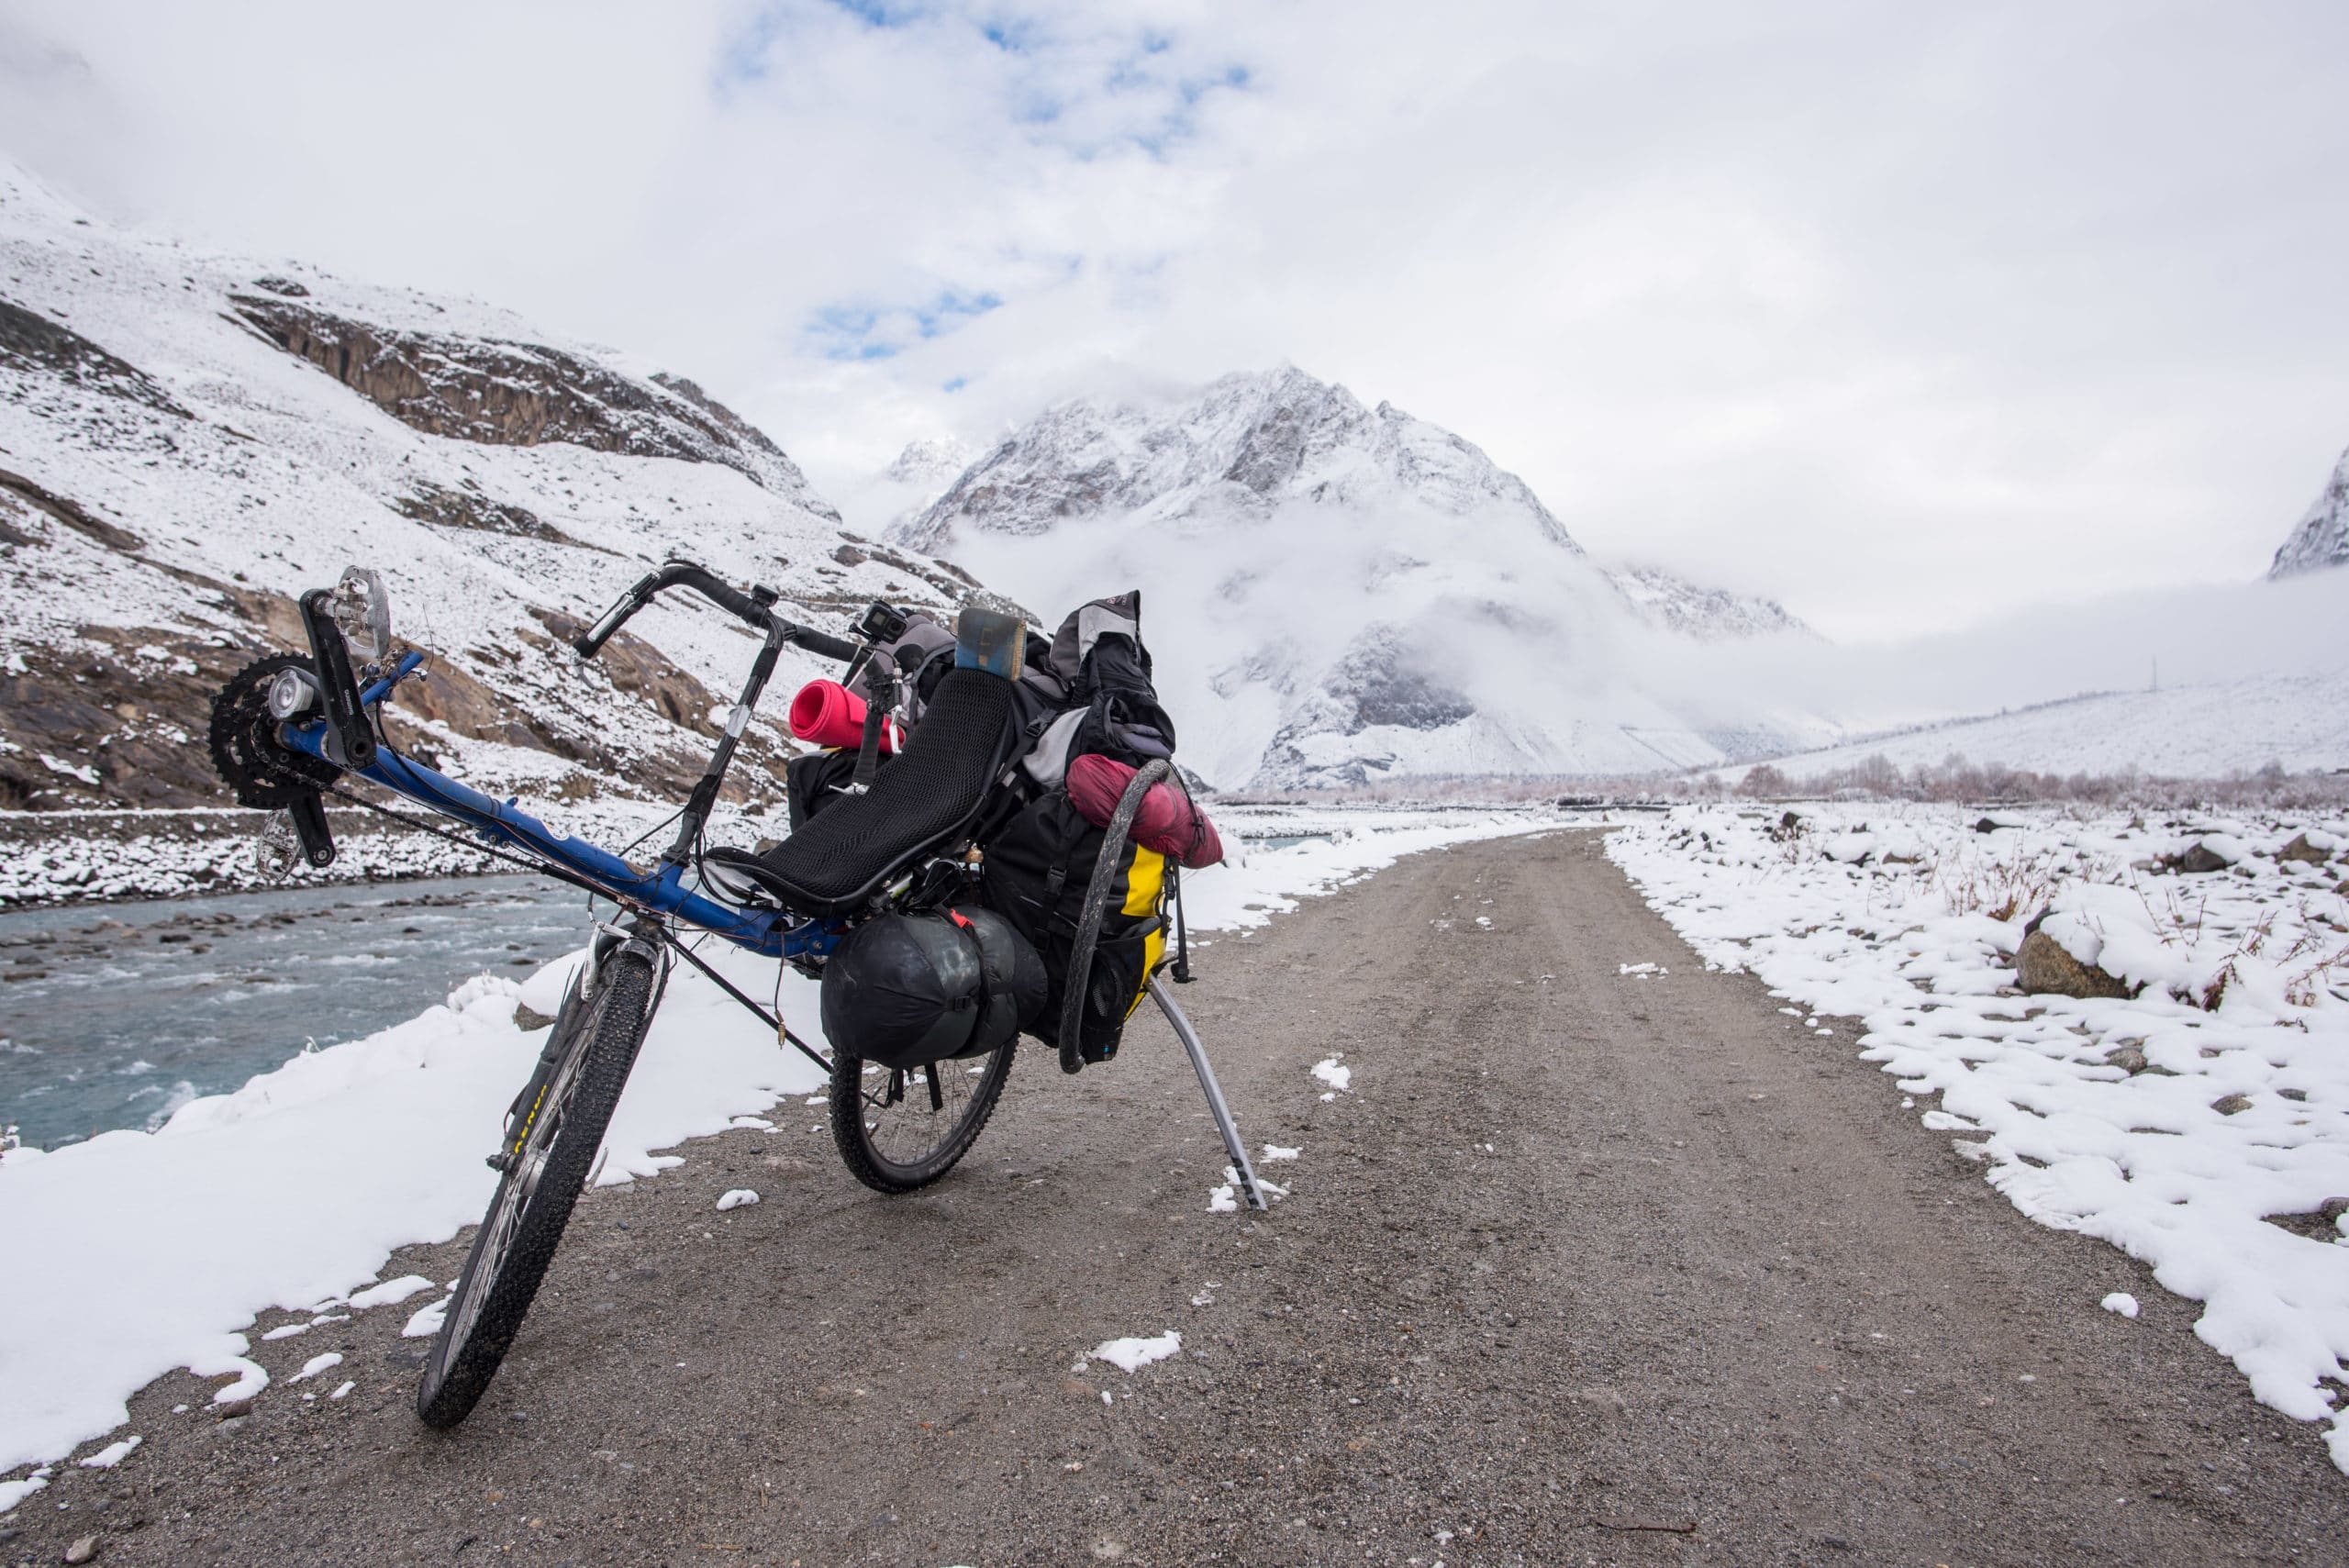 Cycling 13,000 Kilometres From Hungary To India During A Global Pandemic